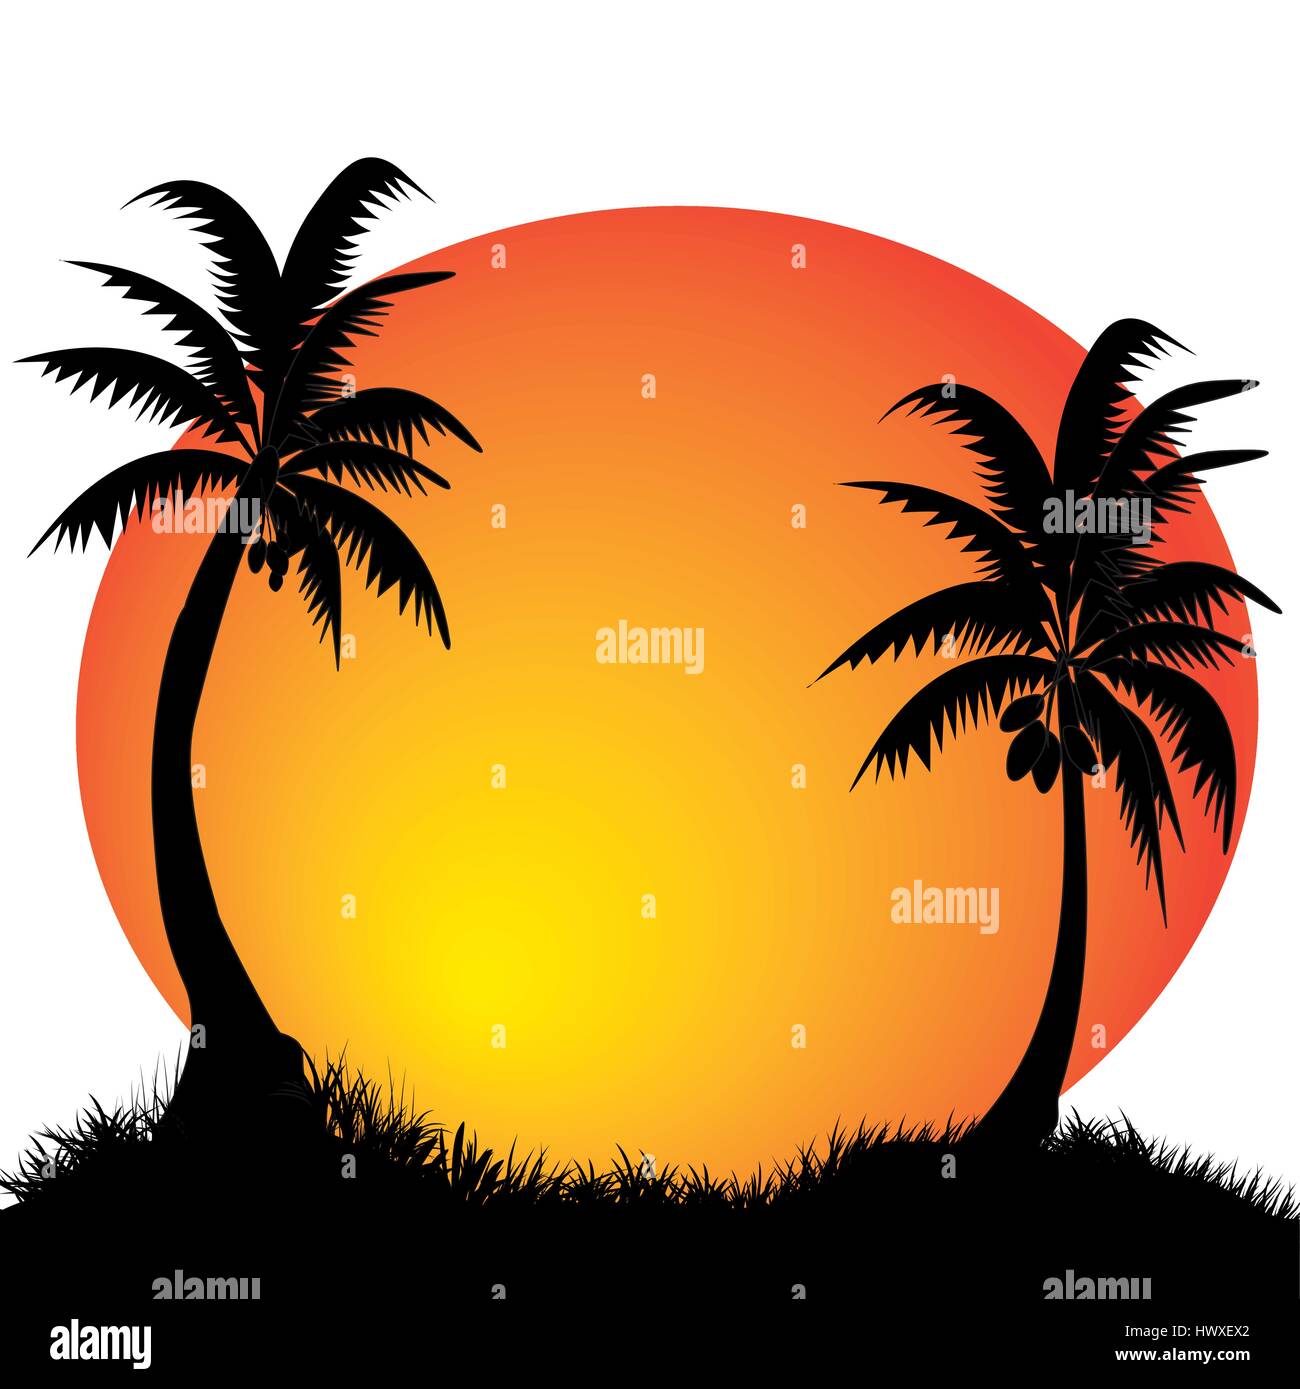 two coconut palm trees with the moon in the background Stock Vector